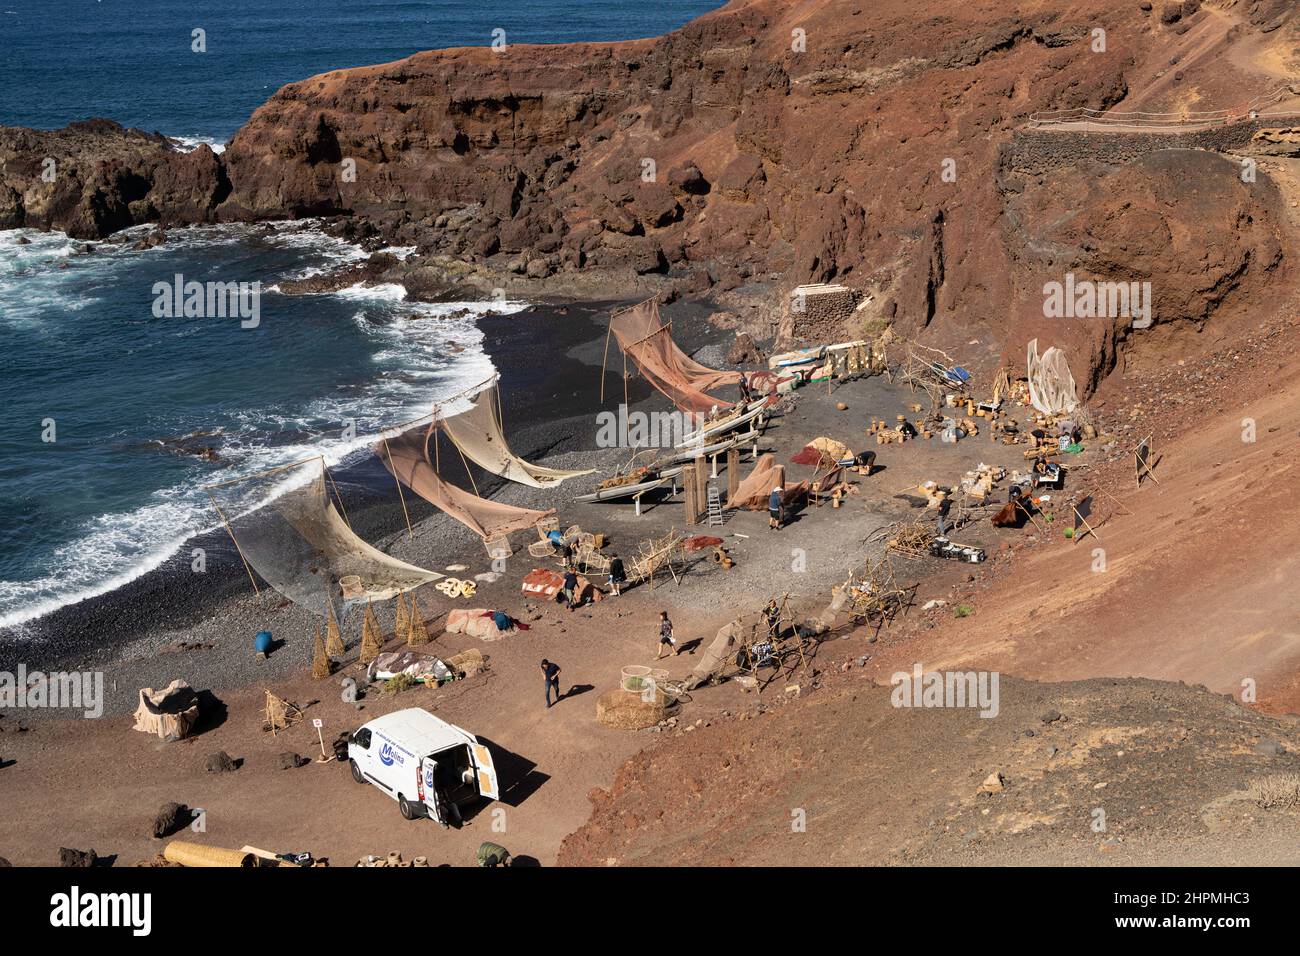 Film set on the beach at El Golfo, Timanfaya National Park, Lanzarote, Canary Islands. Stock Photo